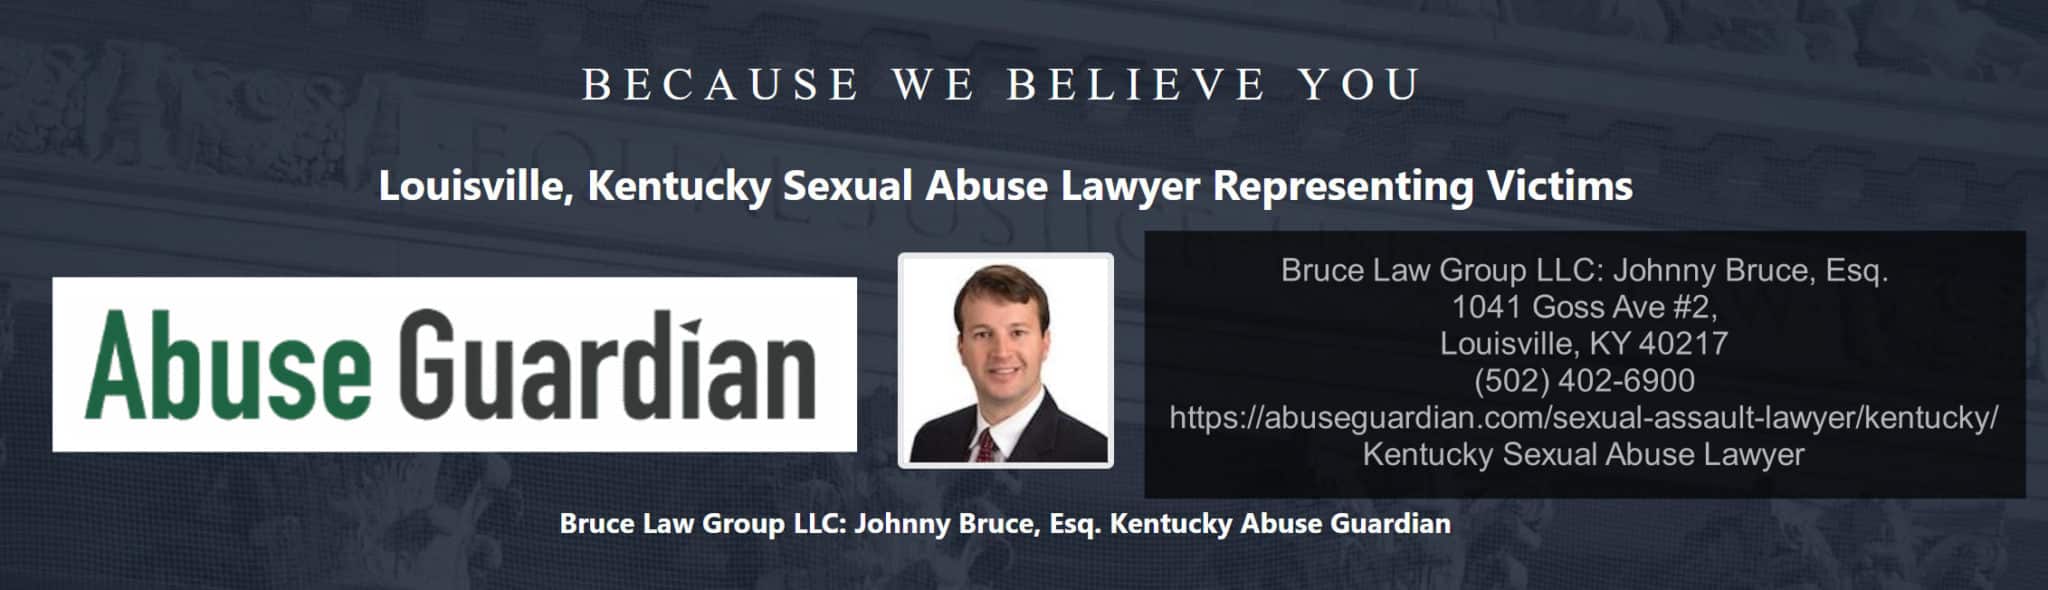 sexual abuse lawyer near me louisville bruce law group llc johnny bruce esq